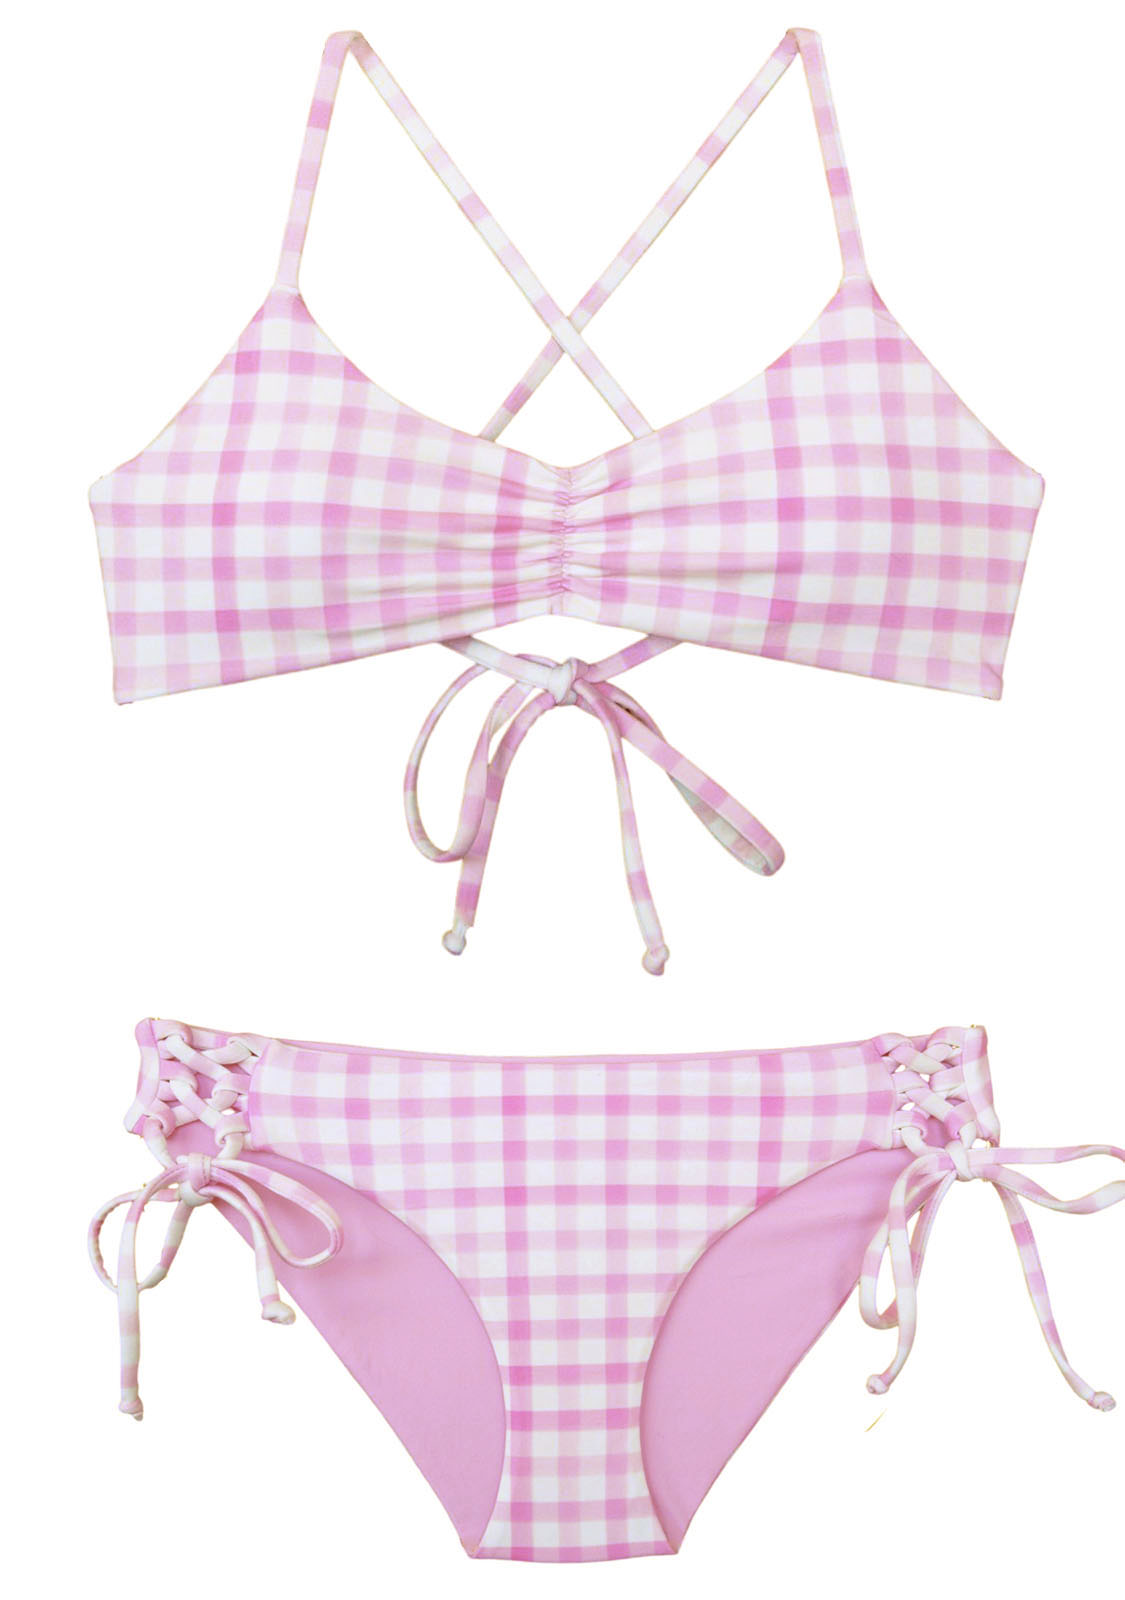 Barbie inspired pink and white swimsuit for girls ages 10, 11, 12, 13, 14, 15, 16, 17, and 18 with padded bralette top and modest bottoms with side ties